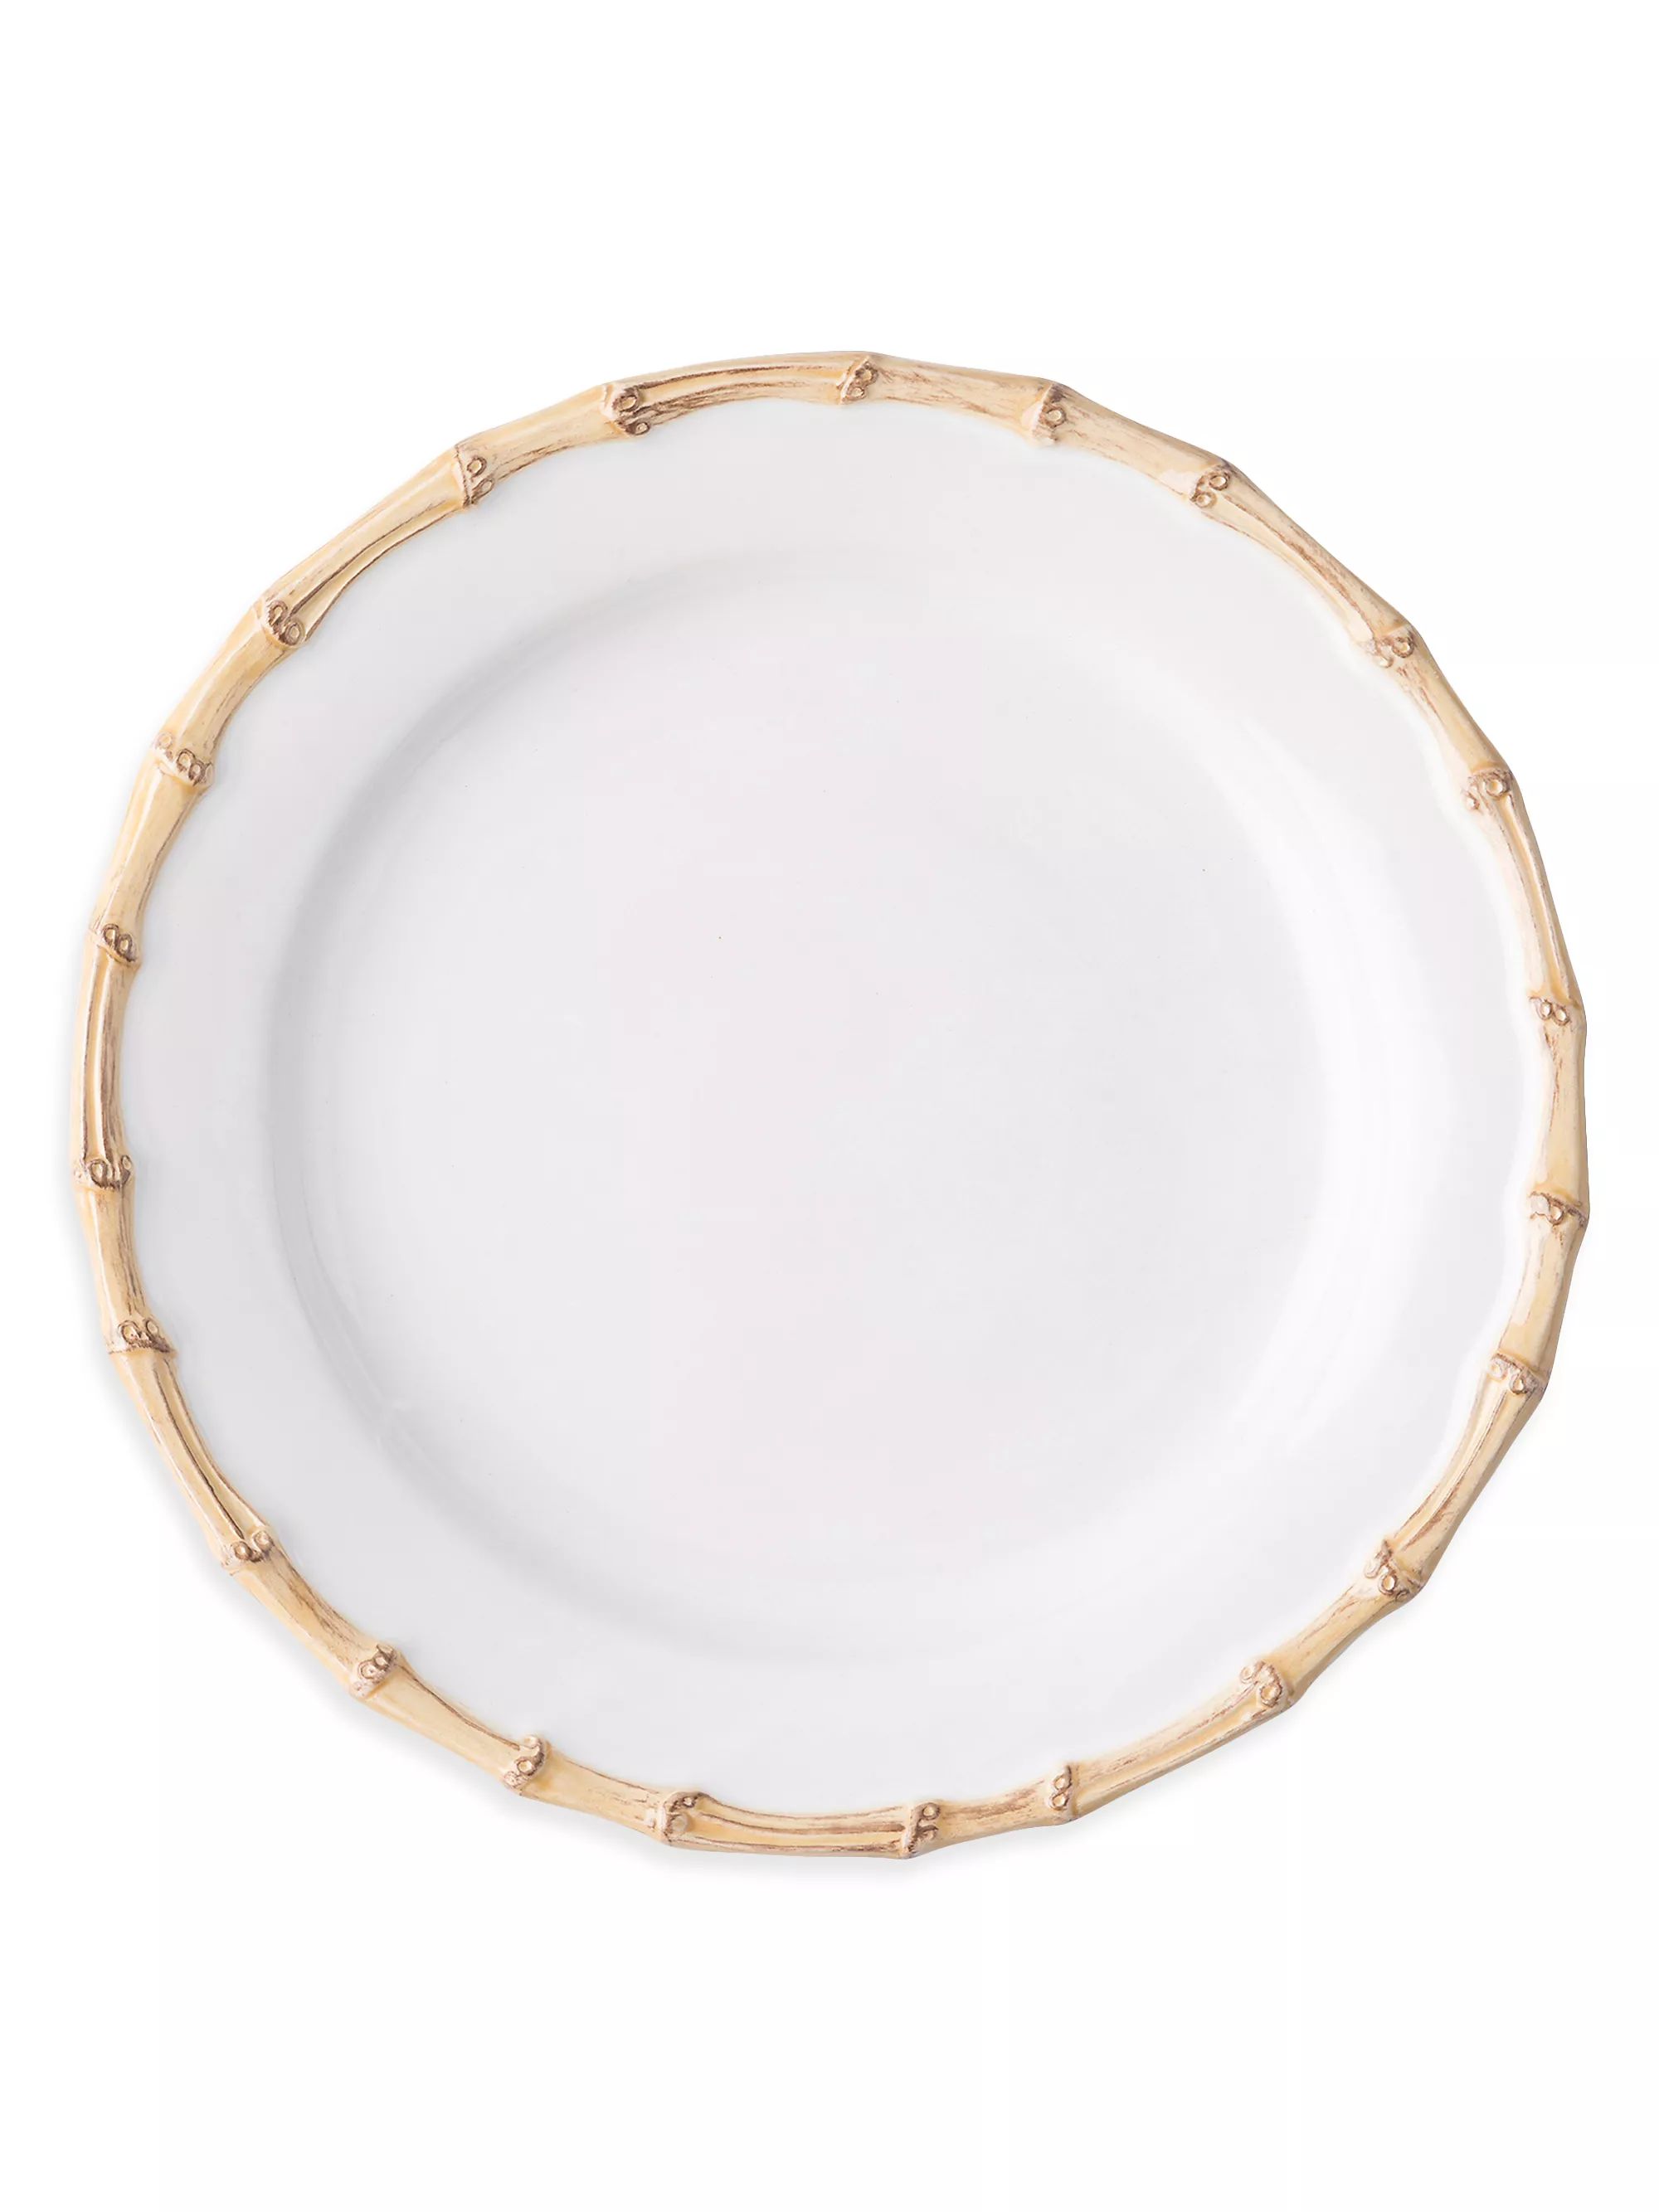 Classic Bamboo Dinner Plate | Saks Fifth Avenue